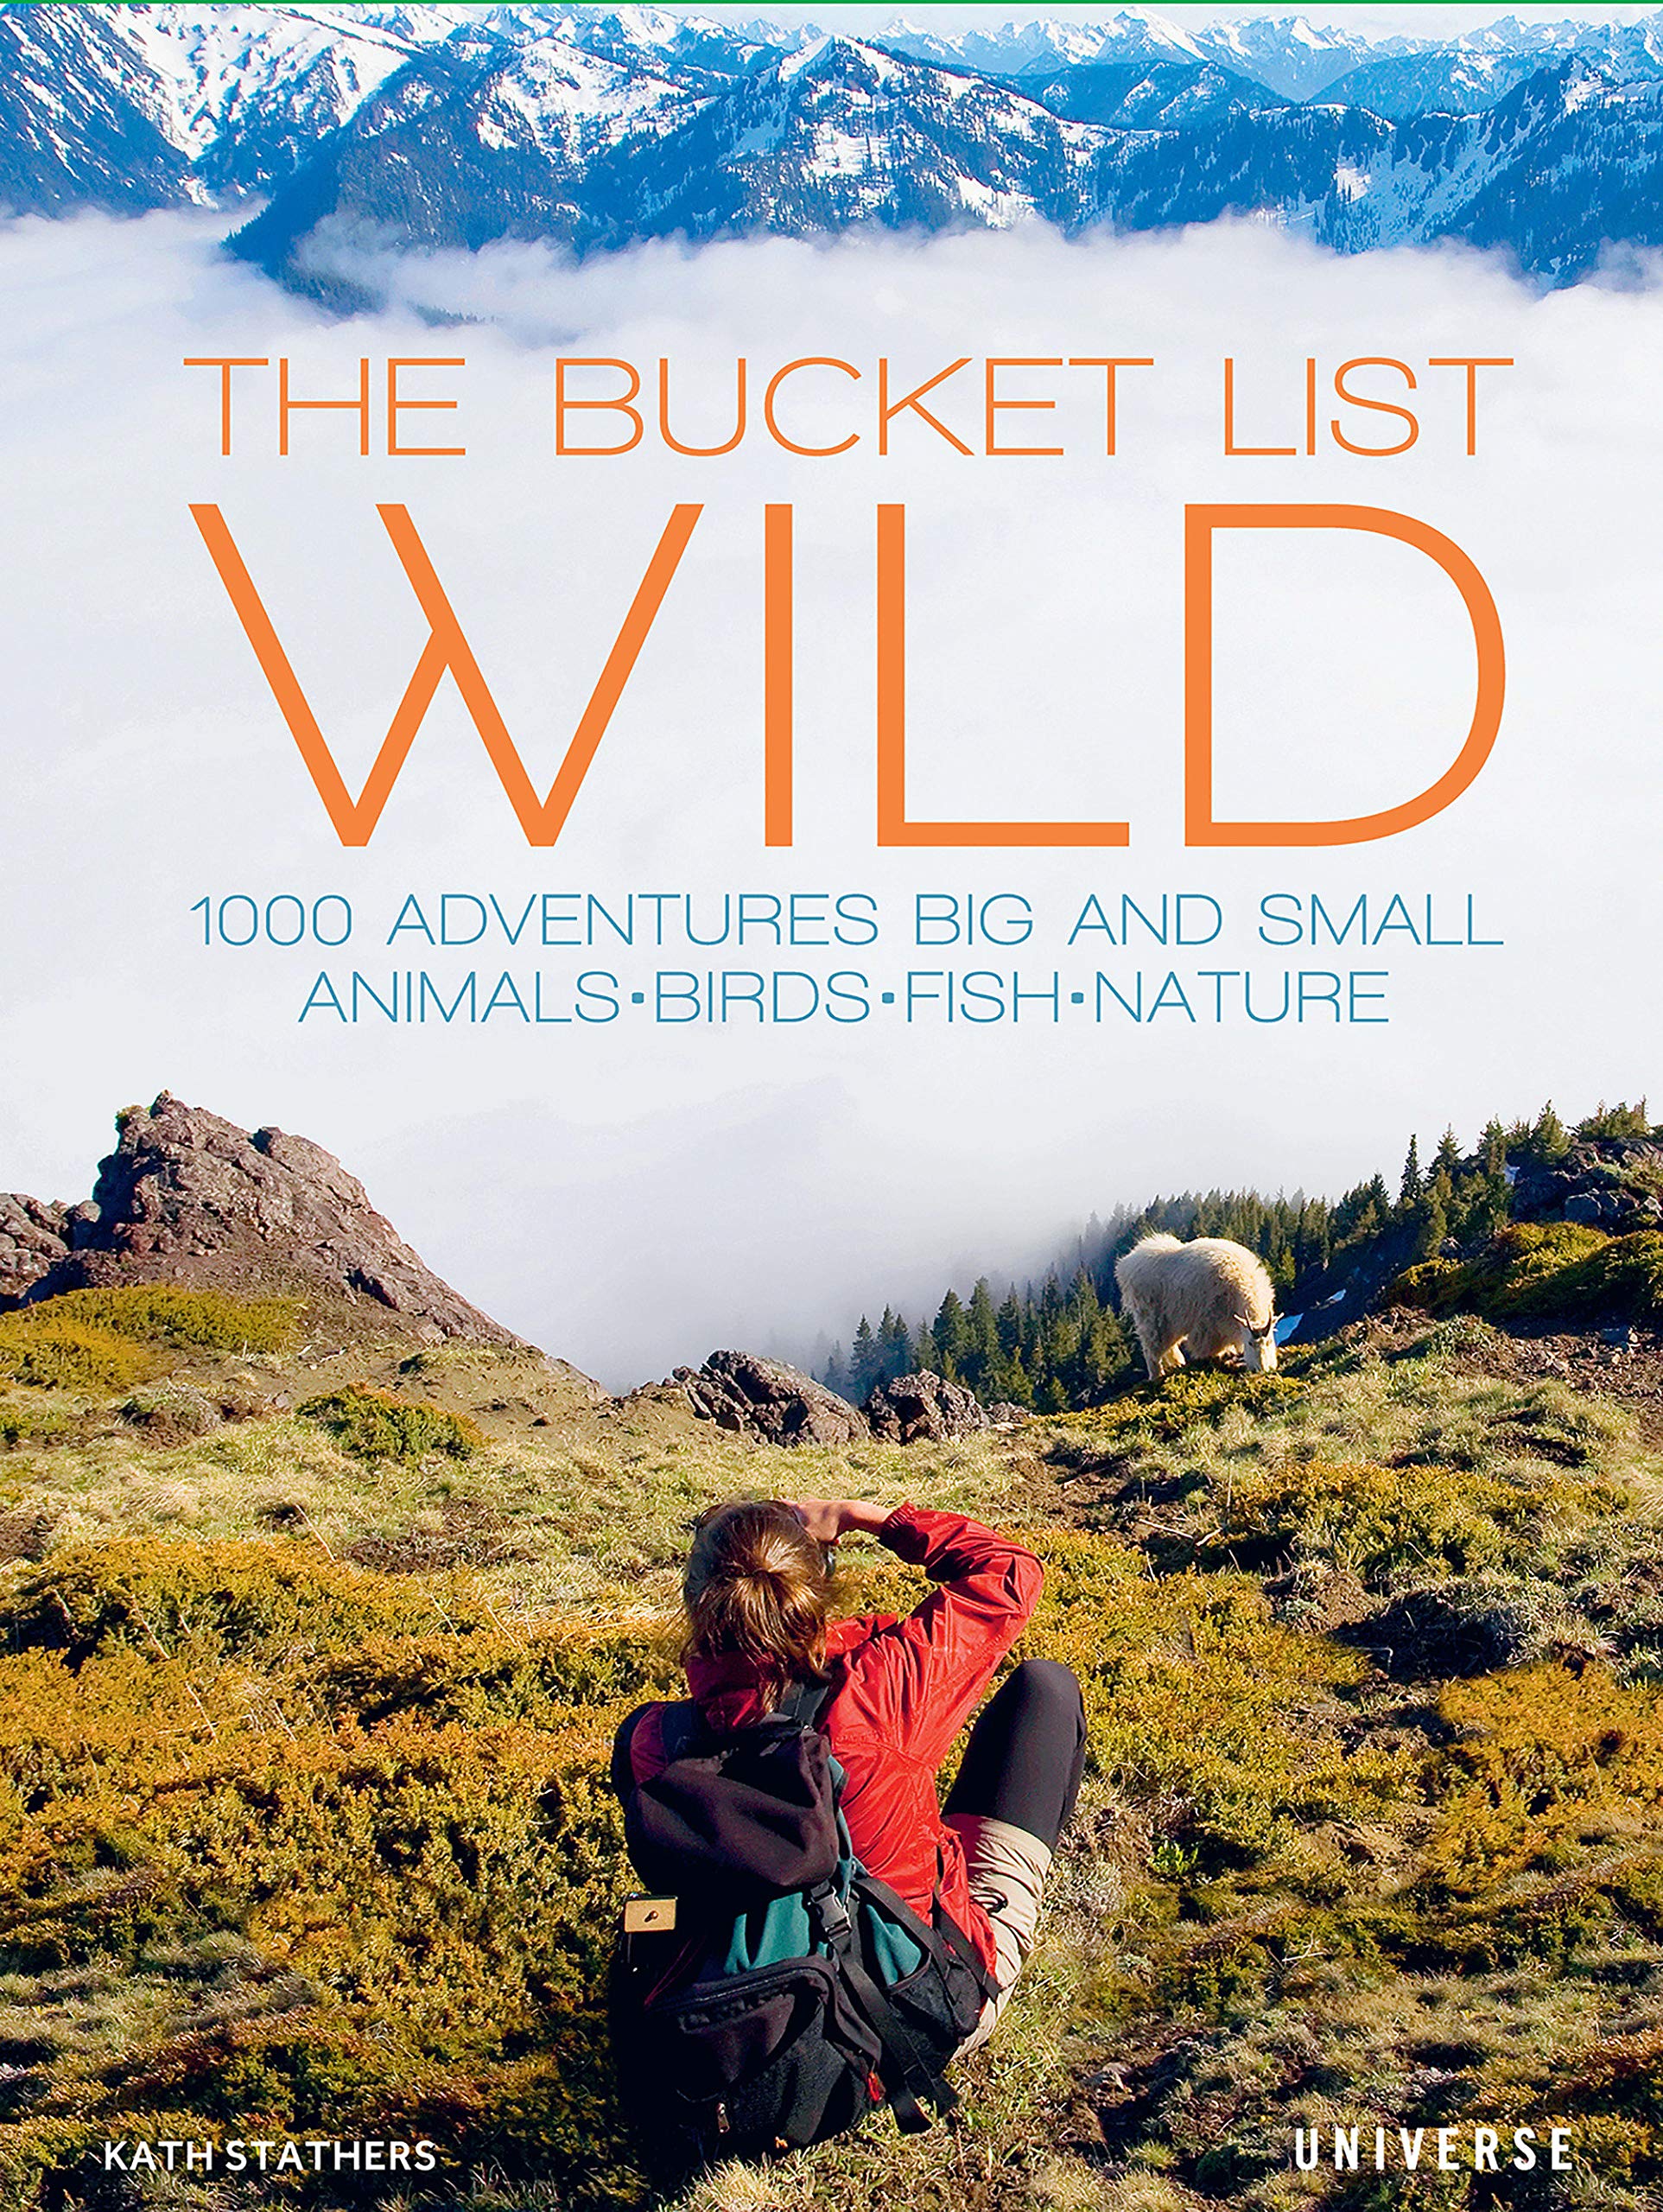 The Bucket List: Wild: 1000 Adventures Big and Small